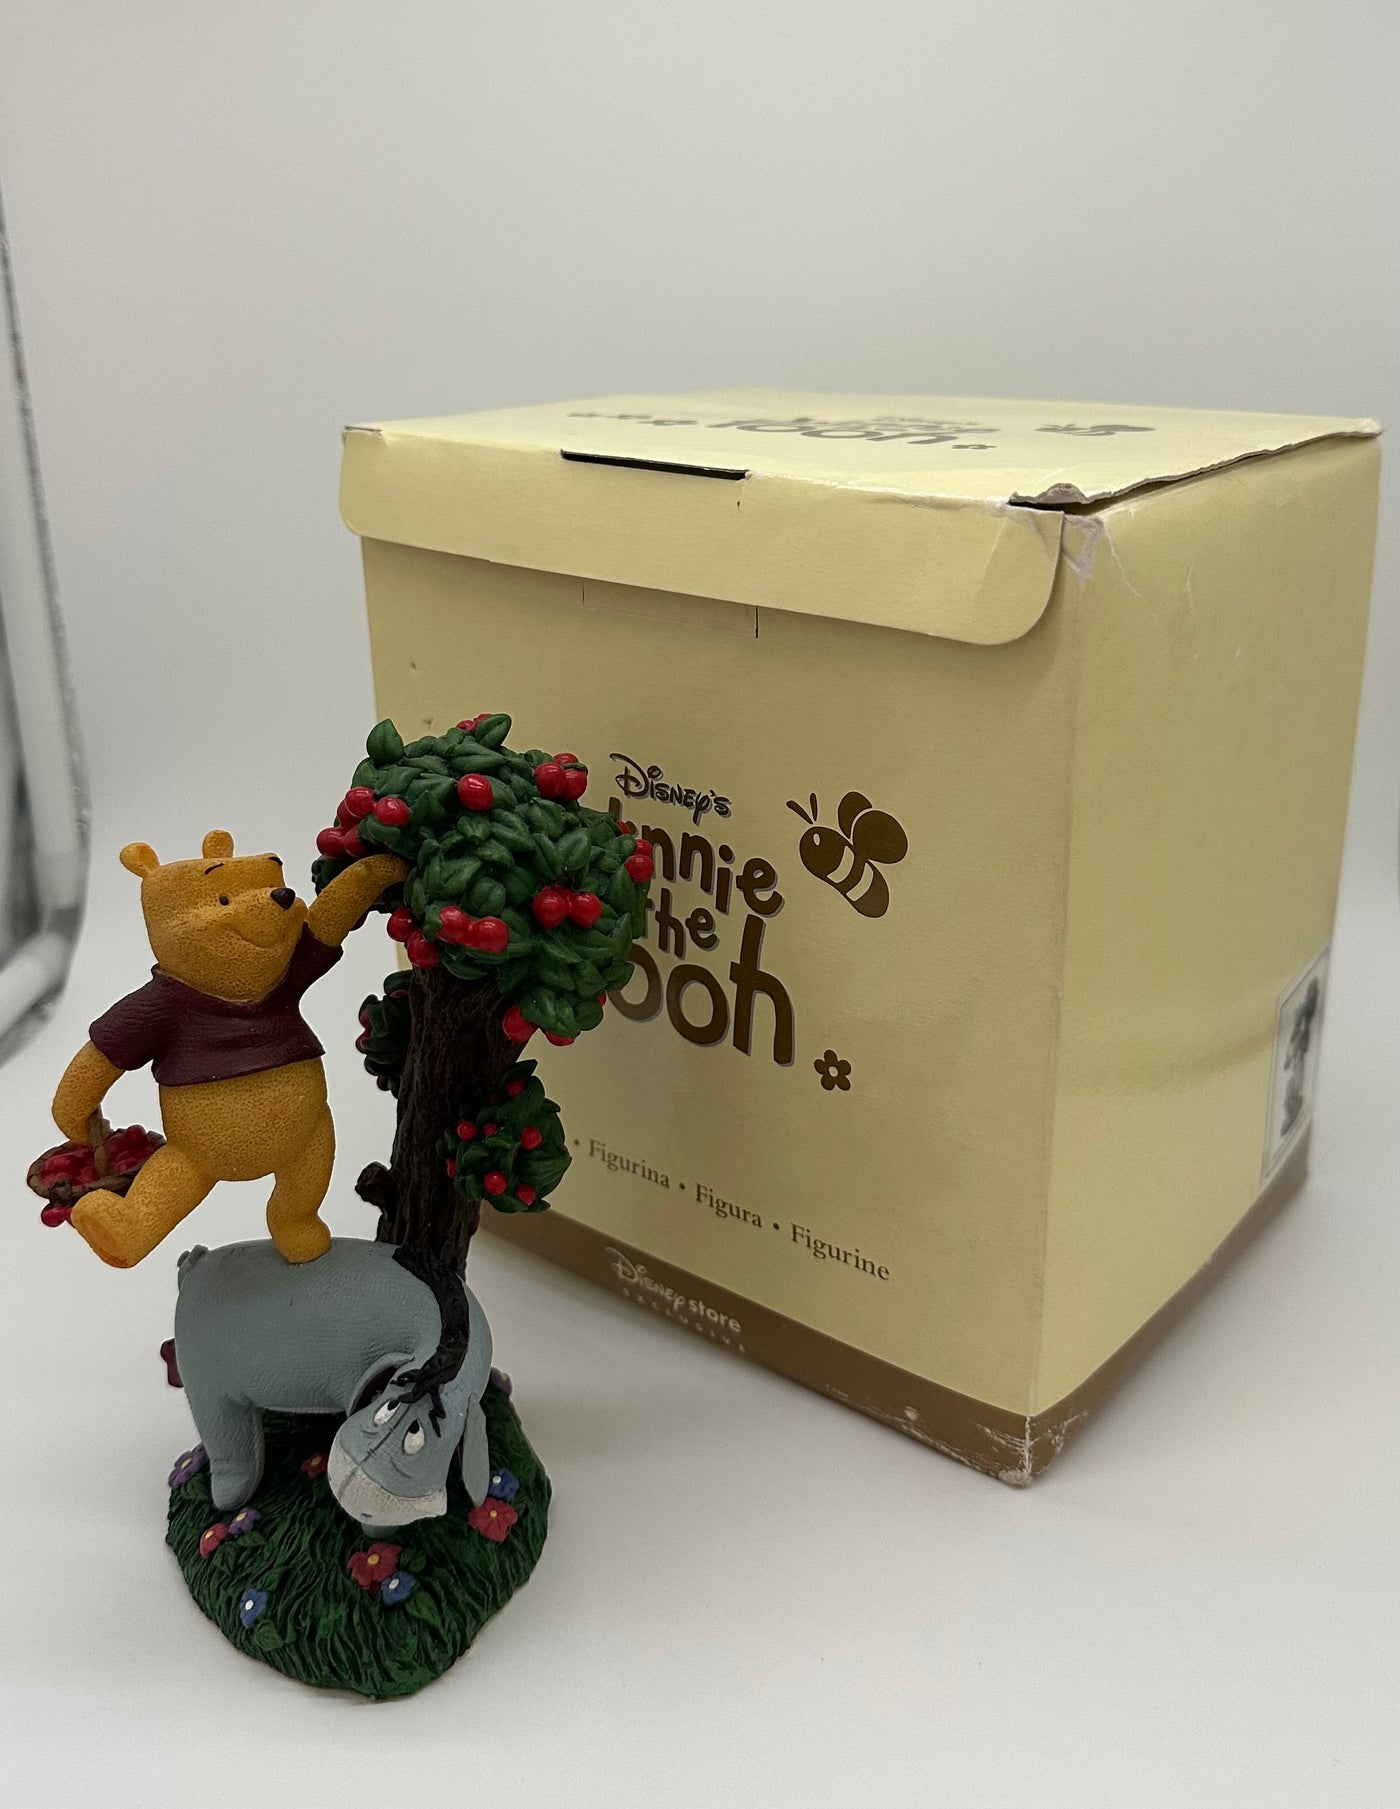 Disney Store Simply Pooh Eeyore Friends Are Always There Figurine New with Box